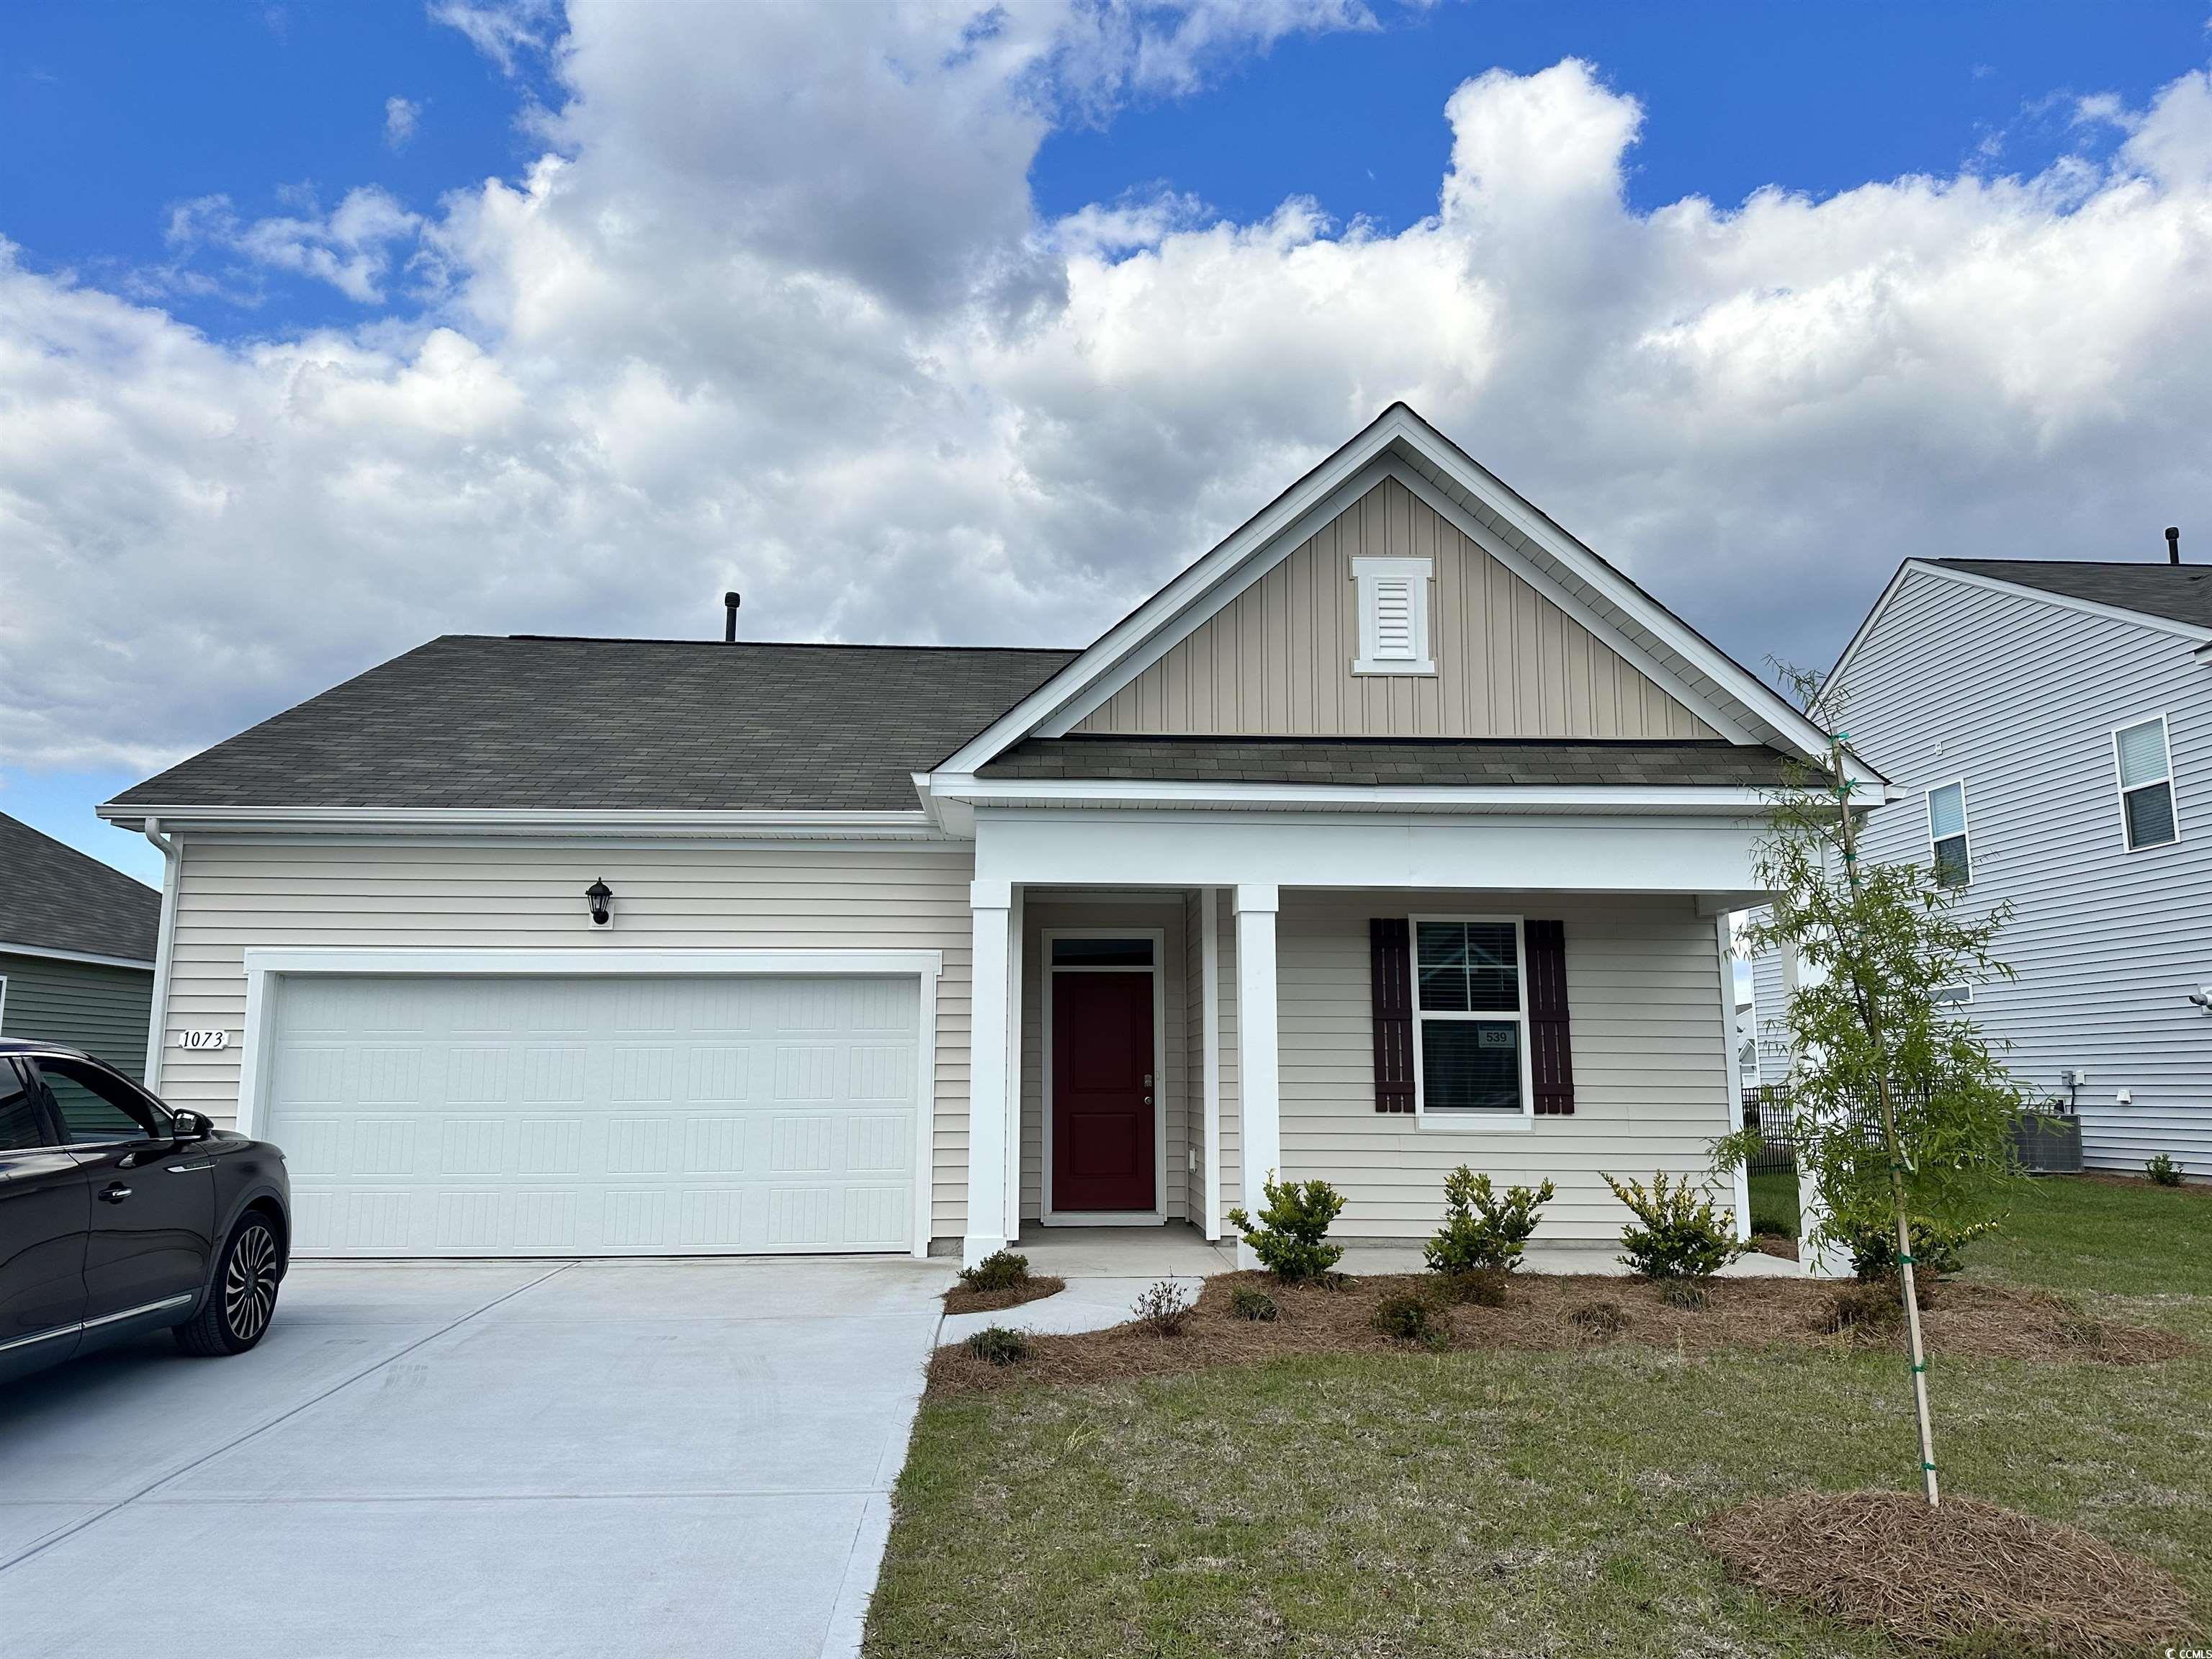 the perfect location; close to conway medical center, college, downtown conway, myrtle beach shops/restaurants and beaches. this new community offers a clubhouse, pool and fitness center! our cali plan is a thoughtfully designed one level home with a beautiful, open concept living area that is perfect for entertaining. the kitchen features granite countertops, an oversized island, 36" cabinetry, a walk-in pantry, and stainless appliances. the large owner's suite is tucked away at the back of the home, separated from the other bedrooms, with a walk-in closet and spacious en suite bath with a double vanity, 5' shower, and separate linen closet. spacious covered rear porch adds additional outdoor living space. this is america's smart home! each of our homes comes with an industry leading smart home package that will allow you to control the thermostat, front door light and lock, and video doorbell from your smartphone or with voice commands to alexa. *photos are of a similar cali home.  (home and community information, including pricing, included features, terms, availability and amenities, are subject to change prior to sale at any time without notice or obligation. square footages are approximate. pictures, photographs, colors, features, and sizes are for illustration purposes only and will vary from the homes as built. equal housing opportunity builder.)